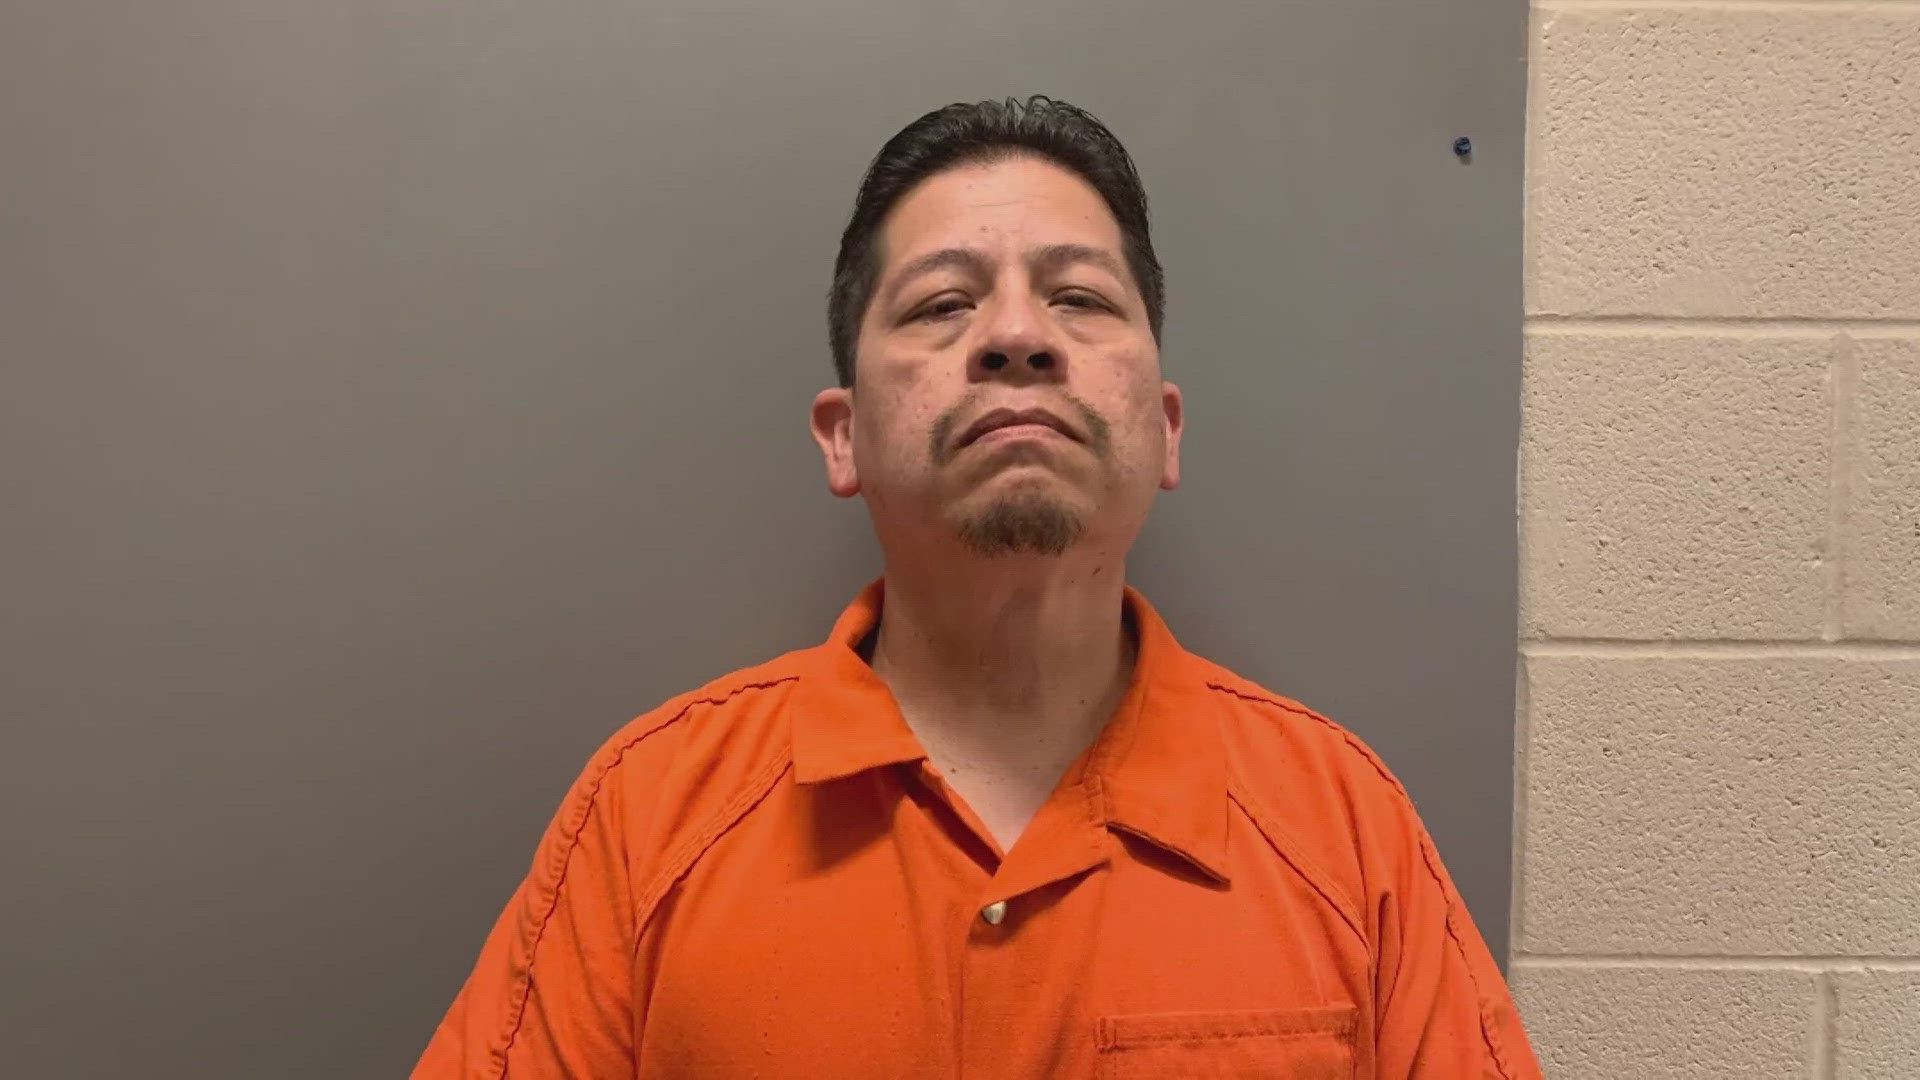 Former Uvalde school district police officer Adrian Gonzales is charged with 29 counts of endangering a child.